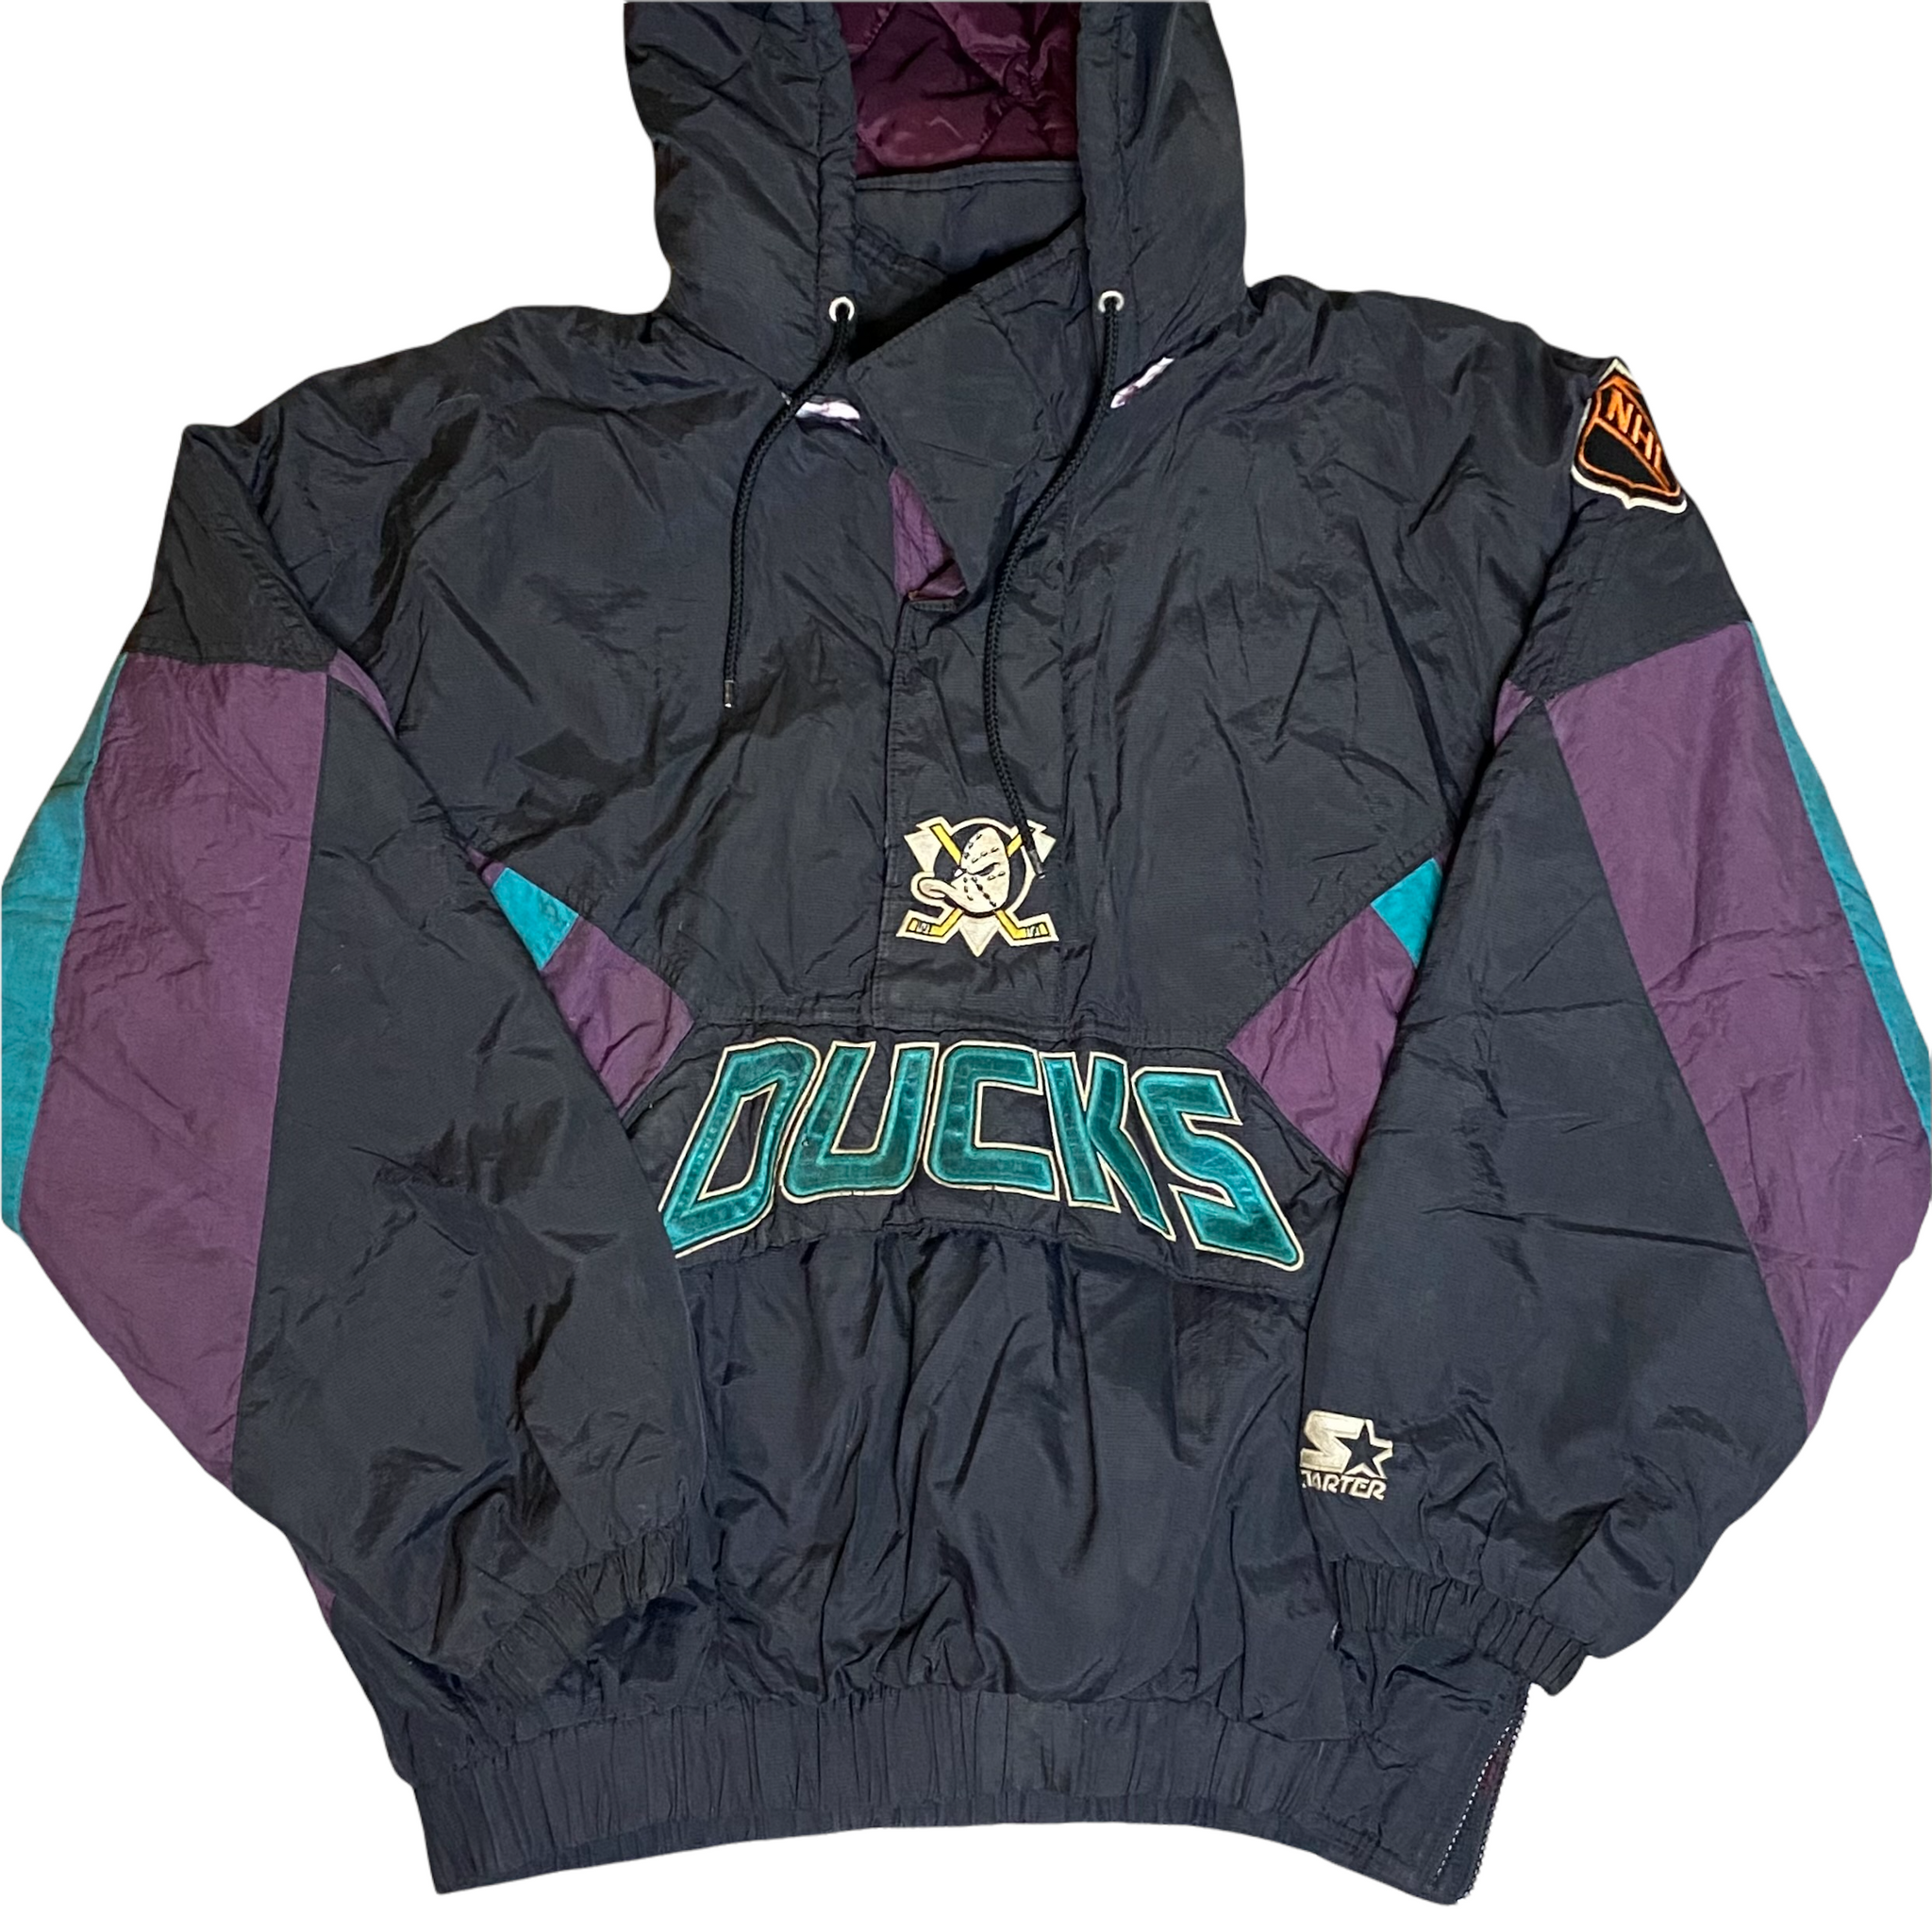 Vintage Mighty Ducks Starter Jacket. Size XL. $120 Shipped SOLD‼️